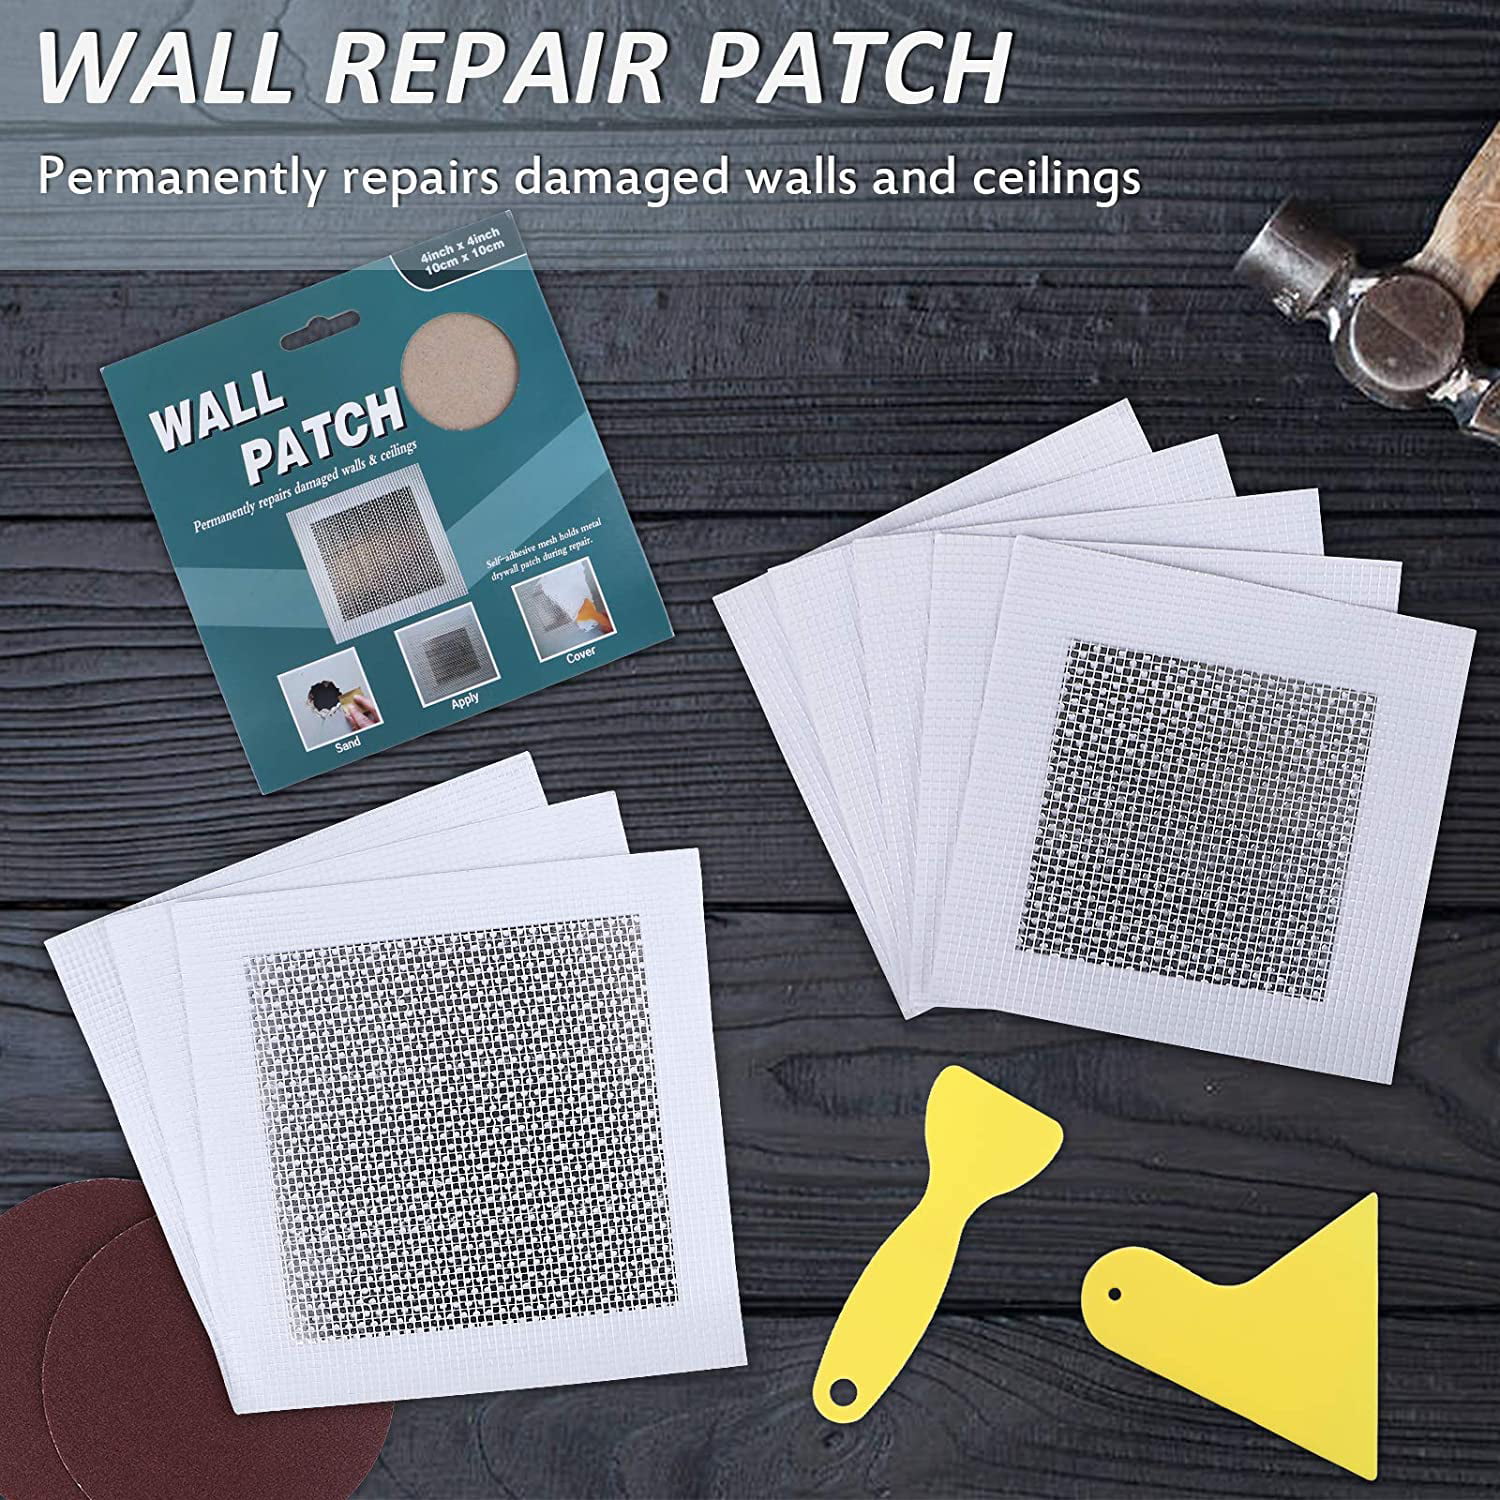 Plasterboard Wall Patch Repairs Damaged Walls & Ceilings 151 Branded Product 